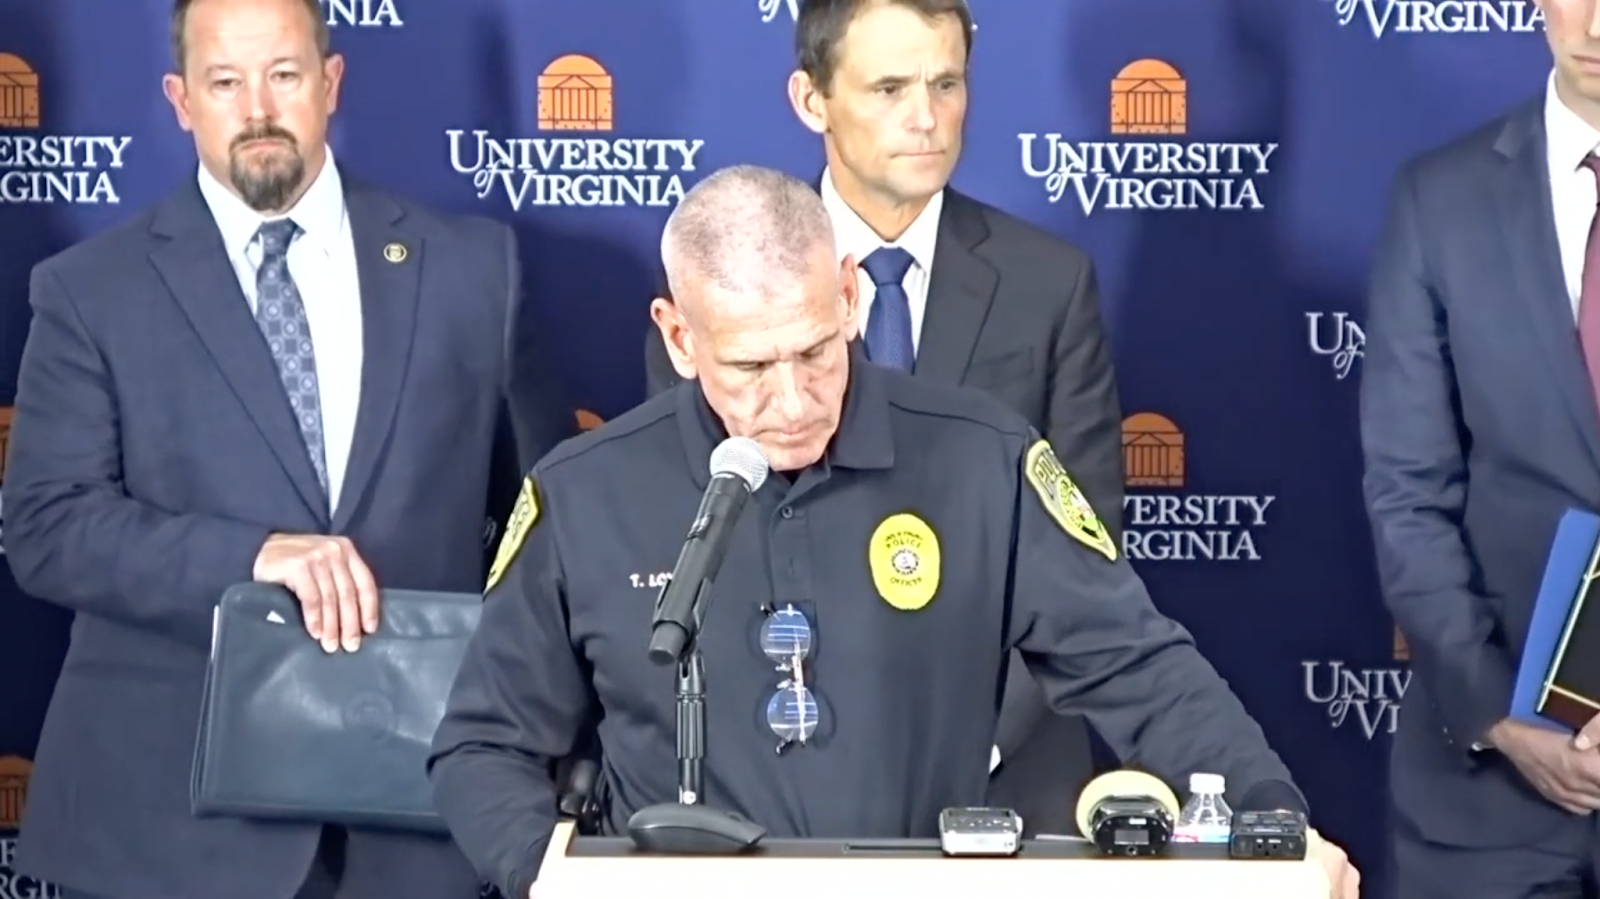 A man in a police uniform stands at a podium with a microphone. Behind him several men stand in suits holding folders.